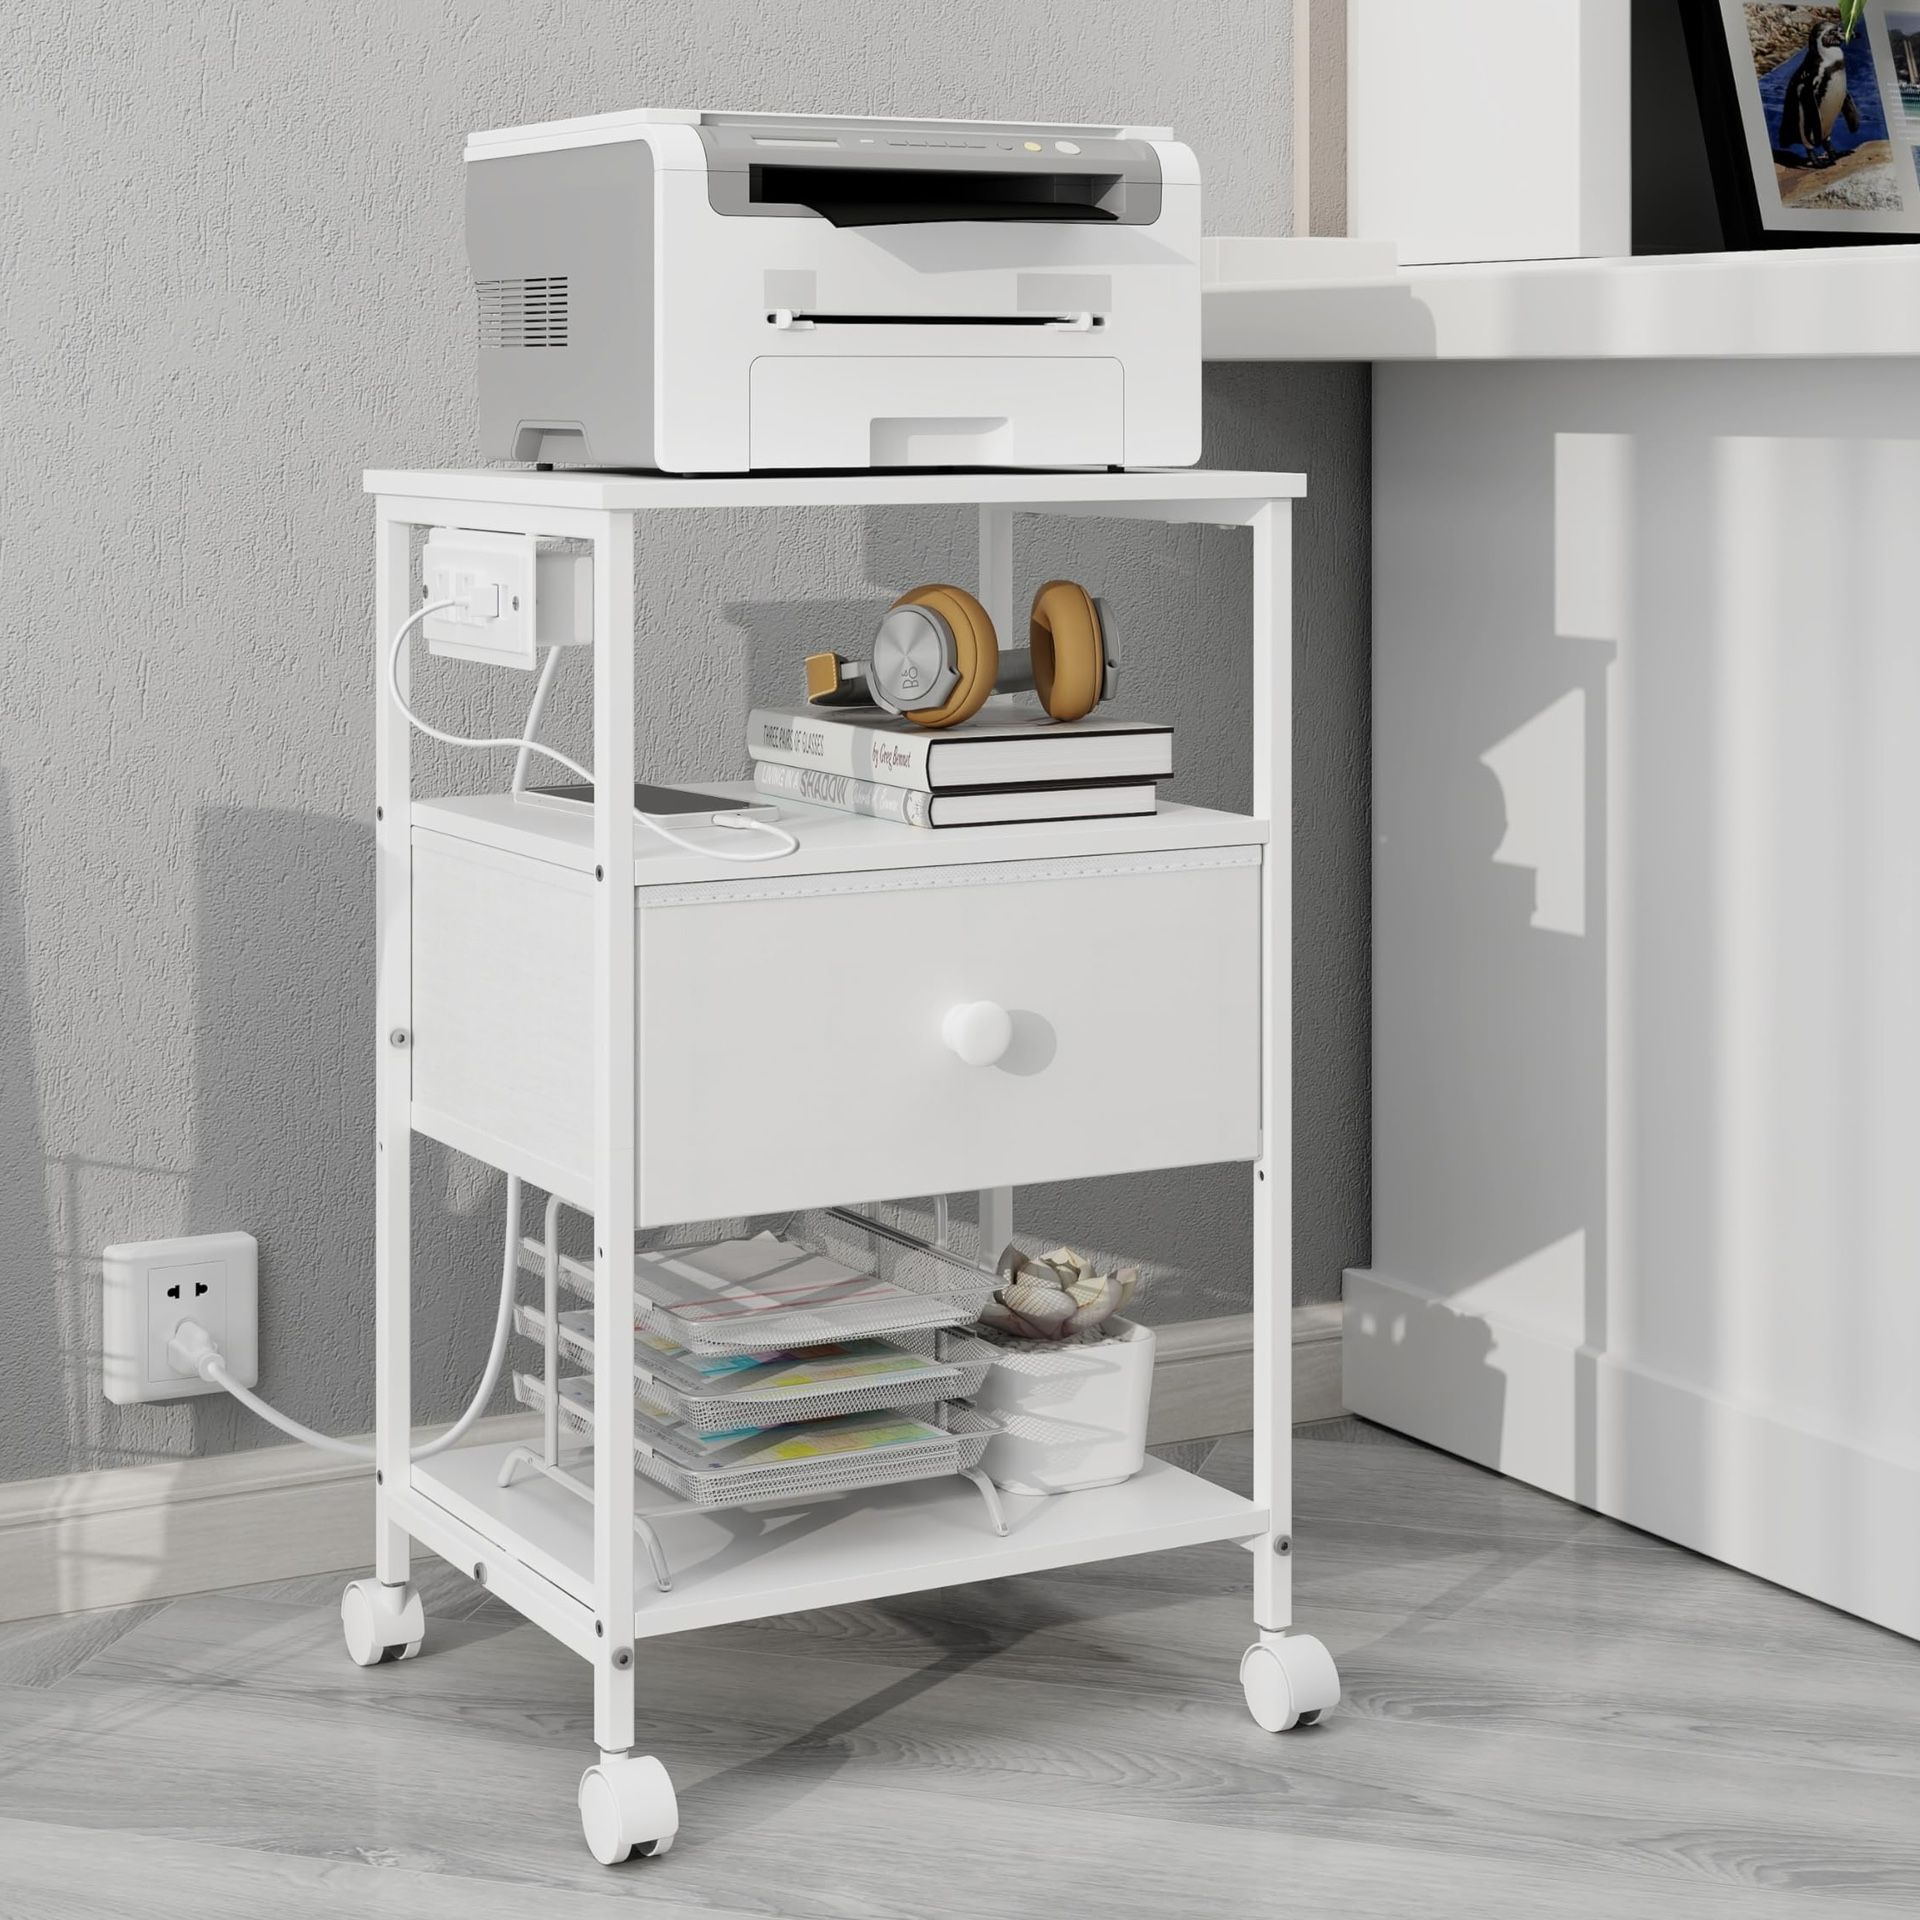 3 Tier Printer Stand w/ Charging Station USB Port Table Storage Fabric Drawer Adjustable Shelf White Office